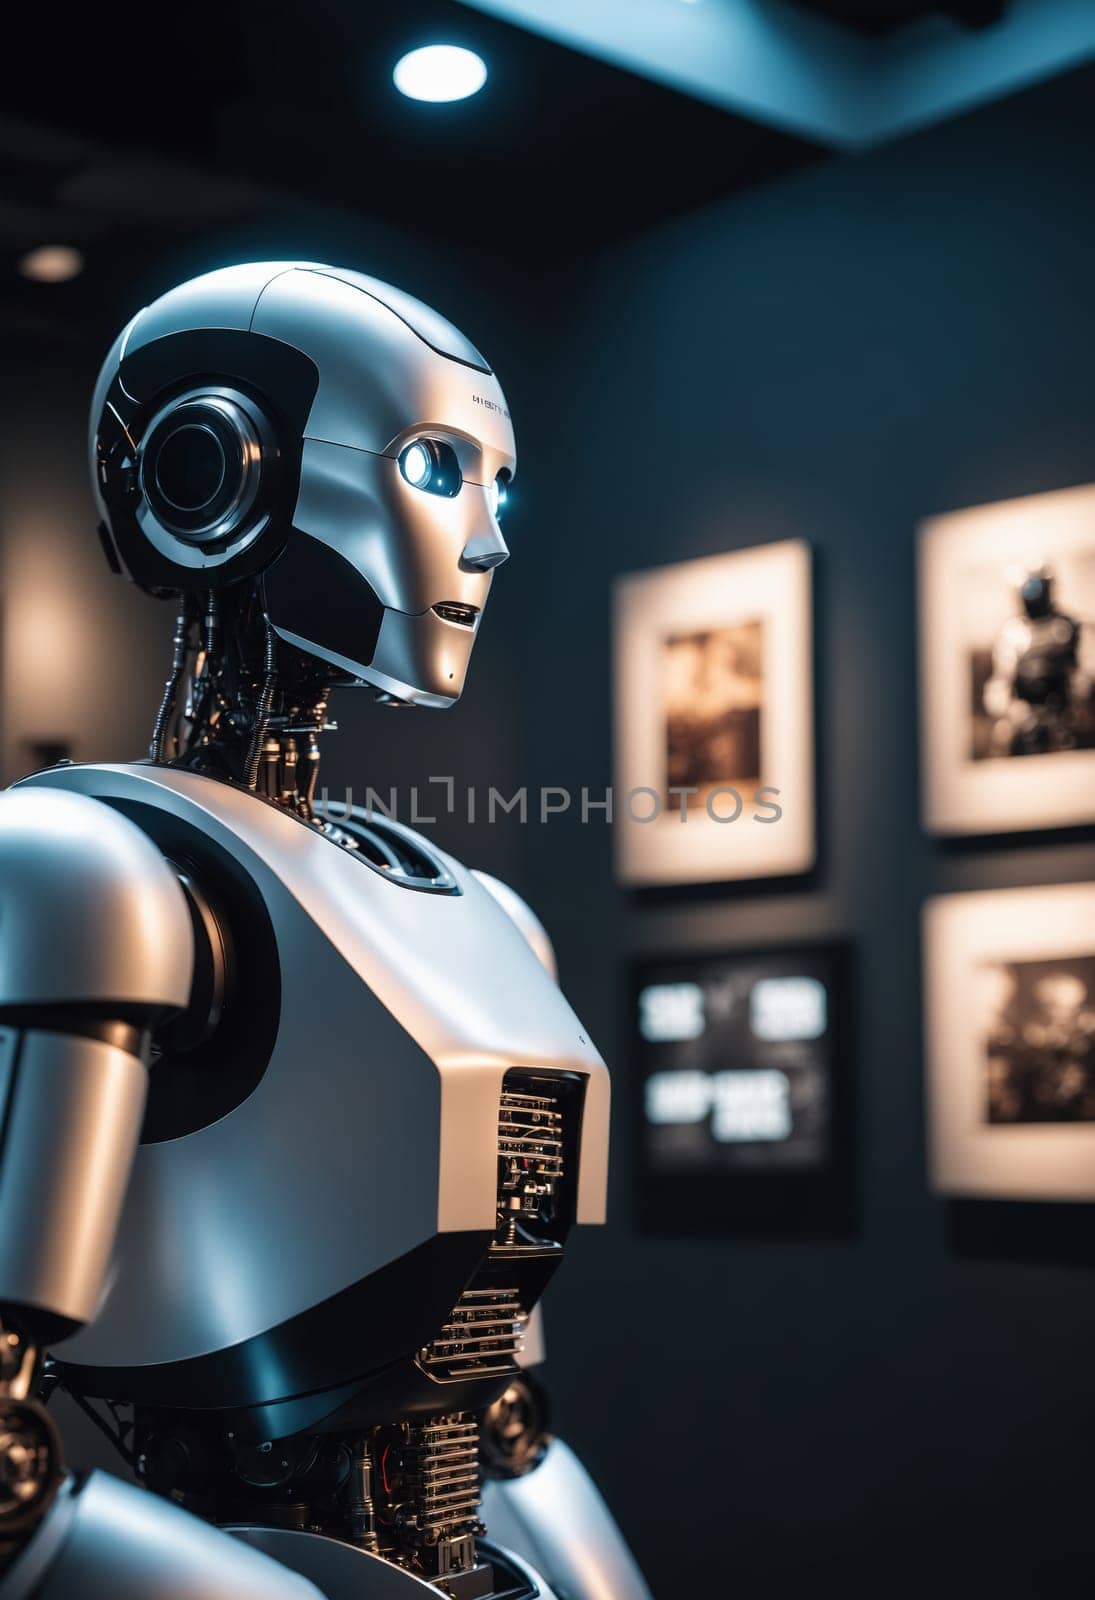 A robot is admiring the picture frame wall displaying fictional characters, composite materials, carmine hues, and automotive designs in an art event